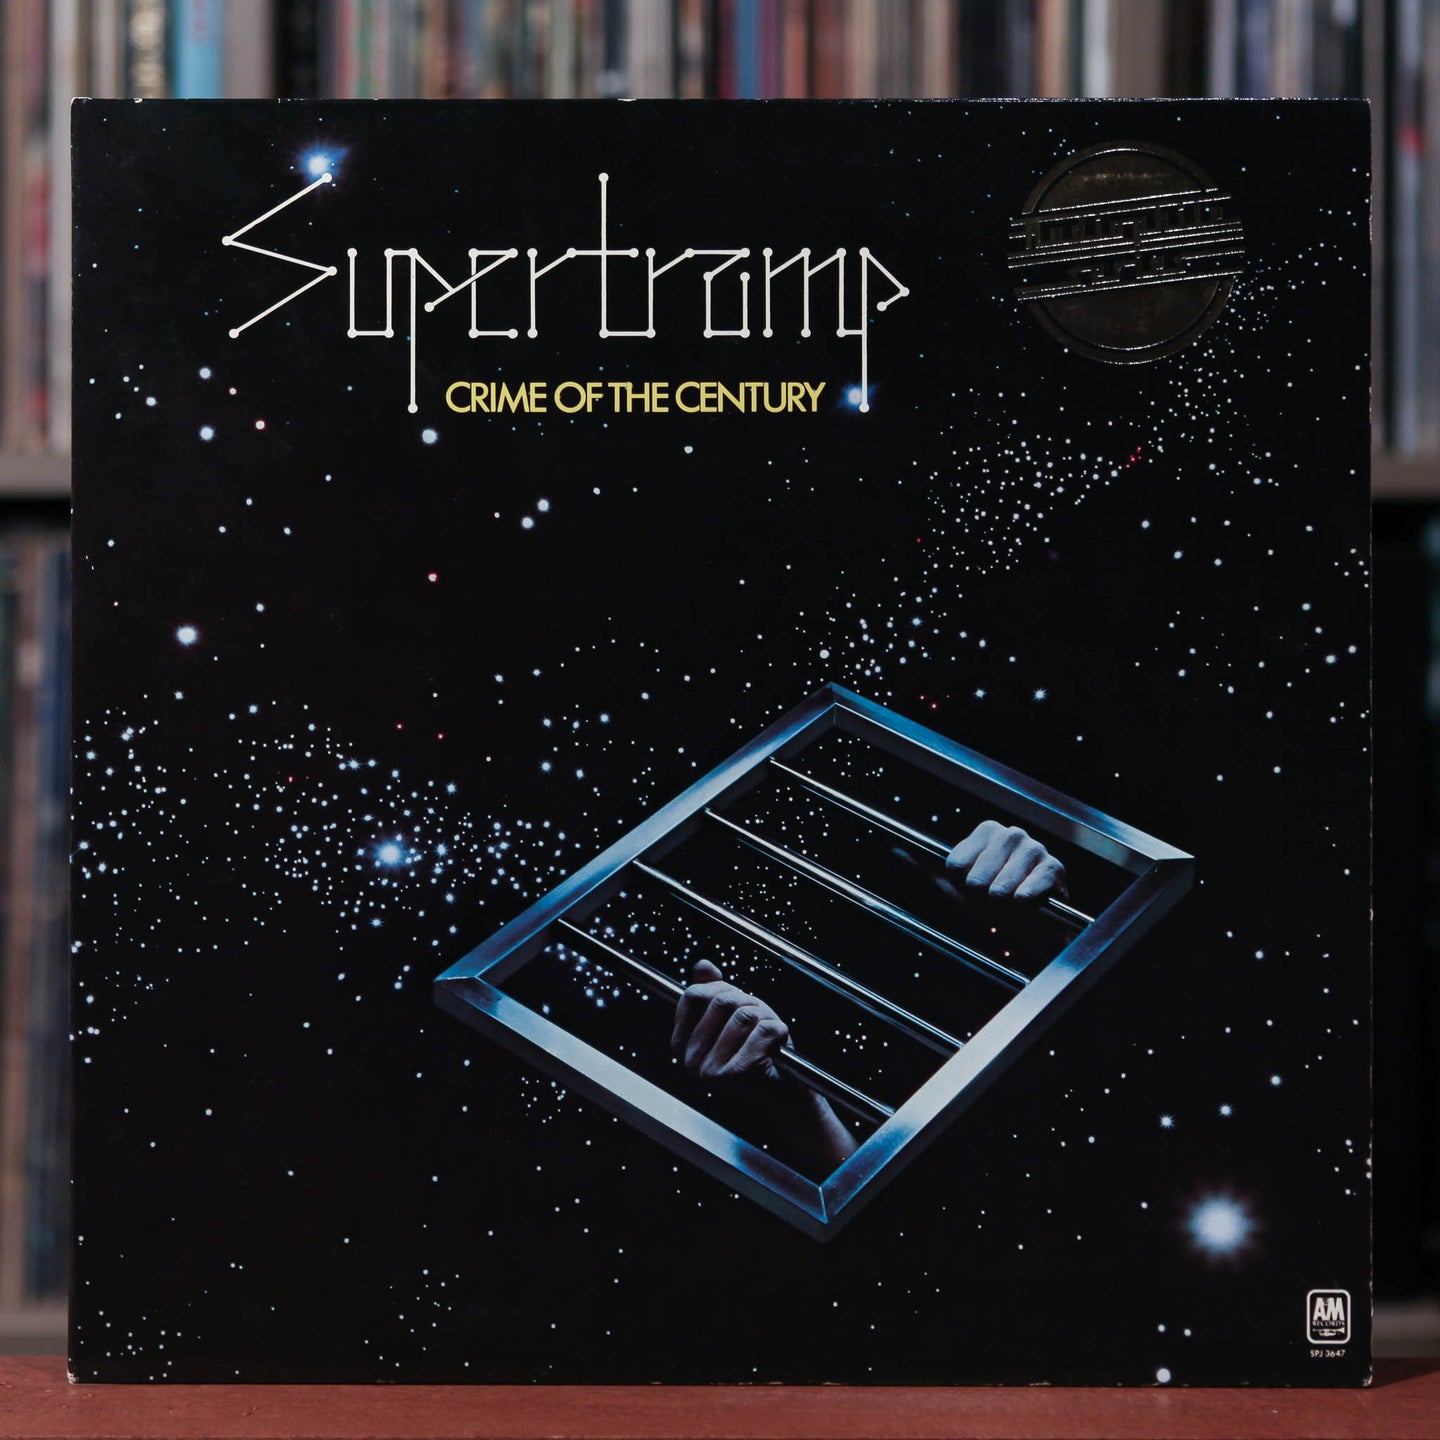 Supertramp - Crime Of The Century - Audiophile Half-Speed Mastered - Canada Import - 1978 A&M - VG+/VG+